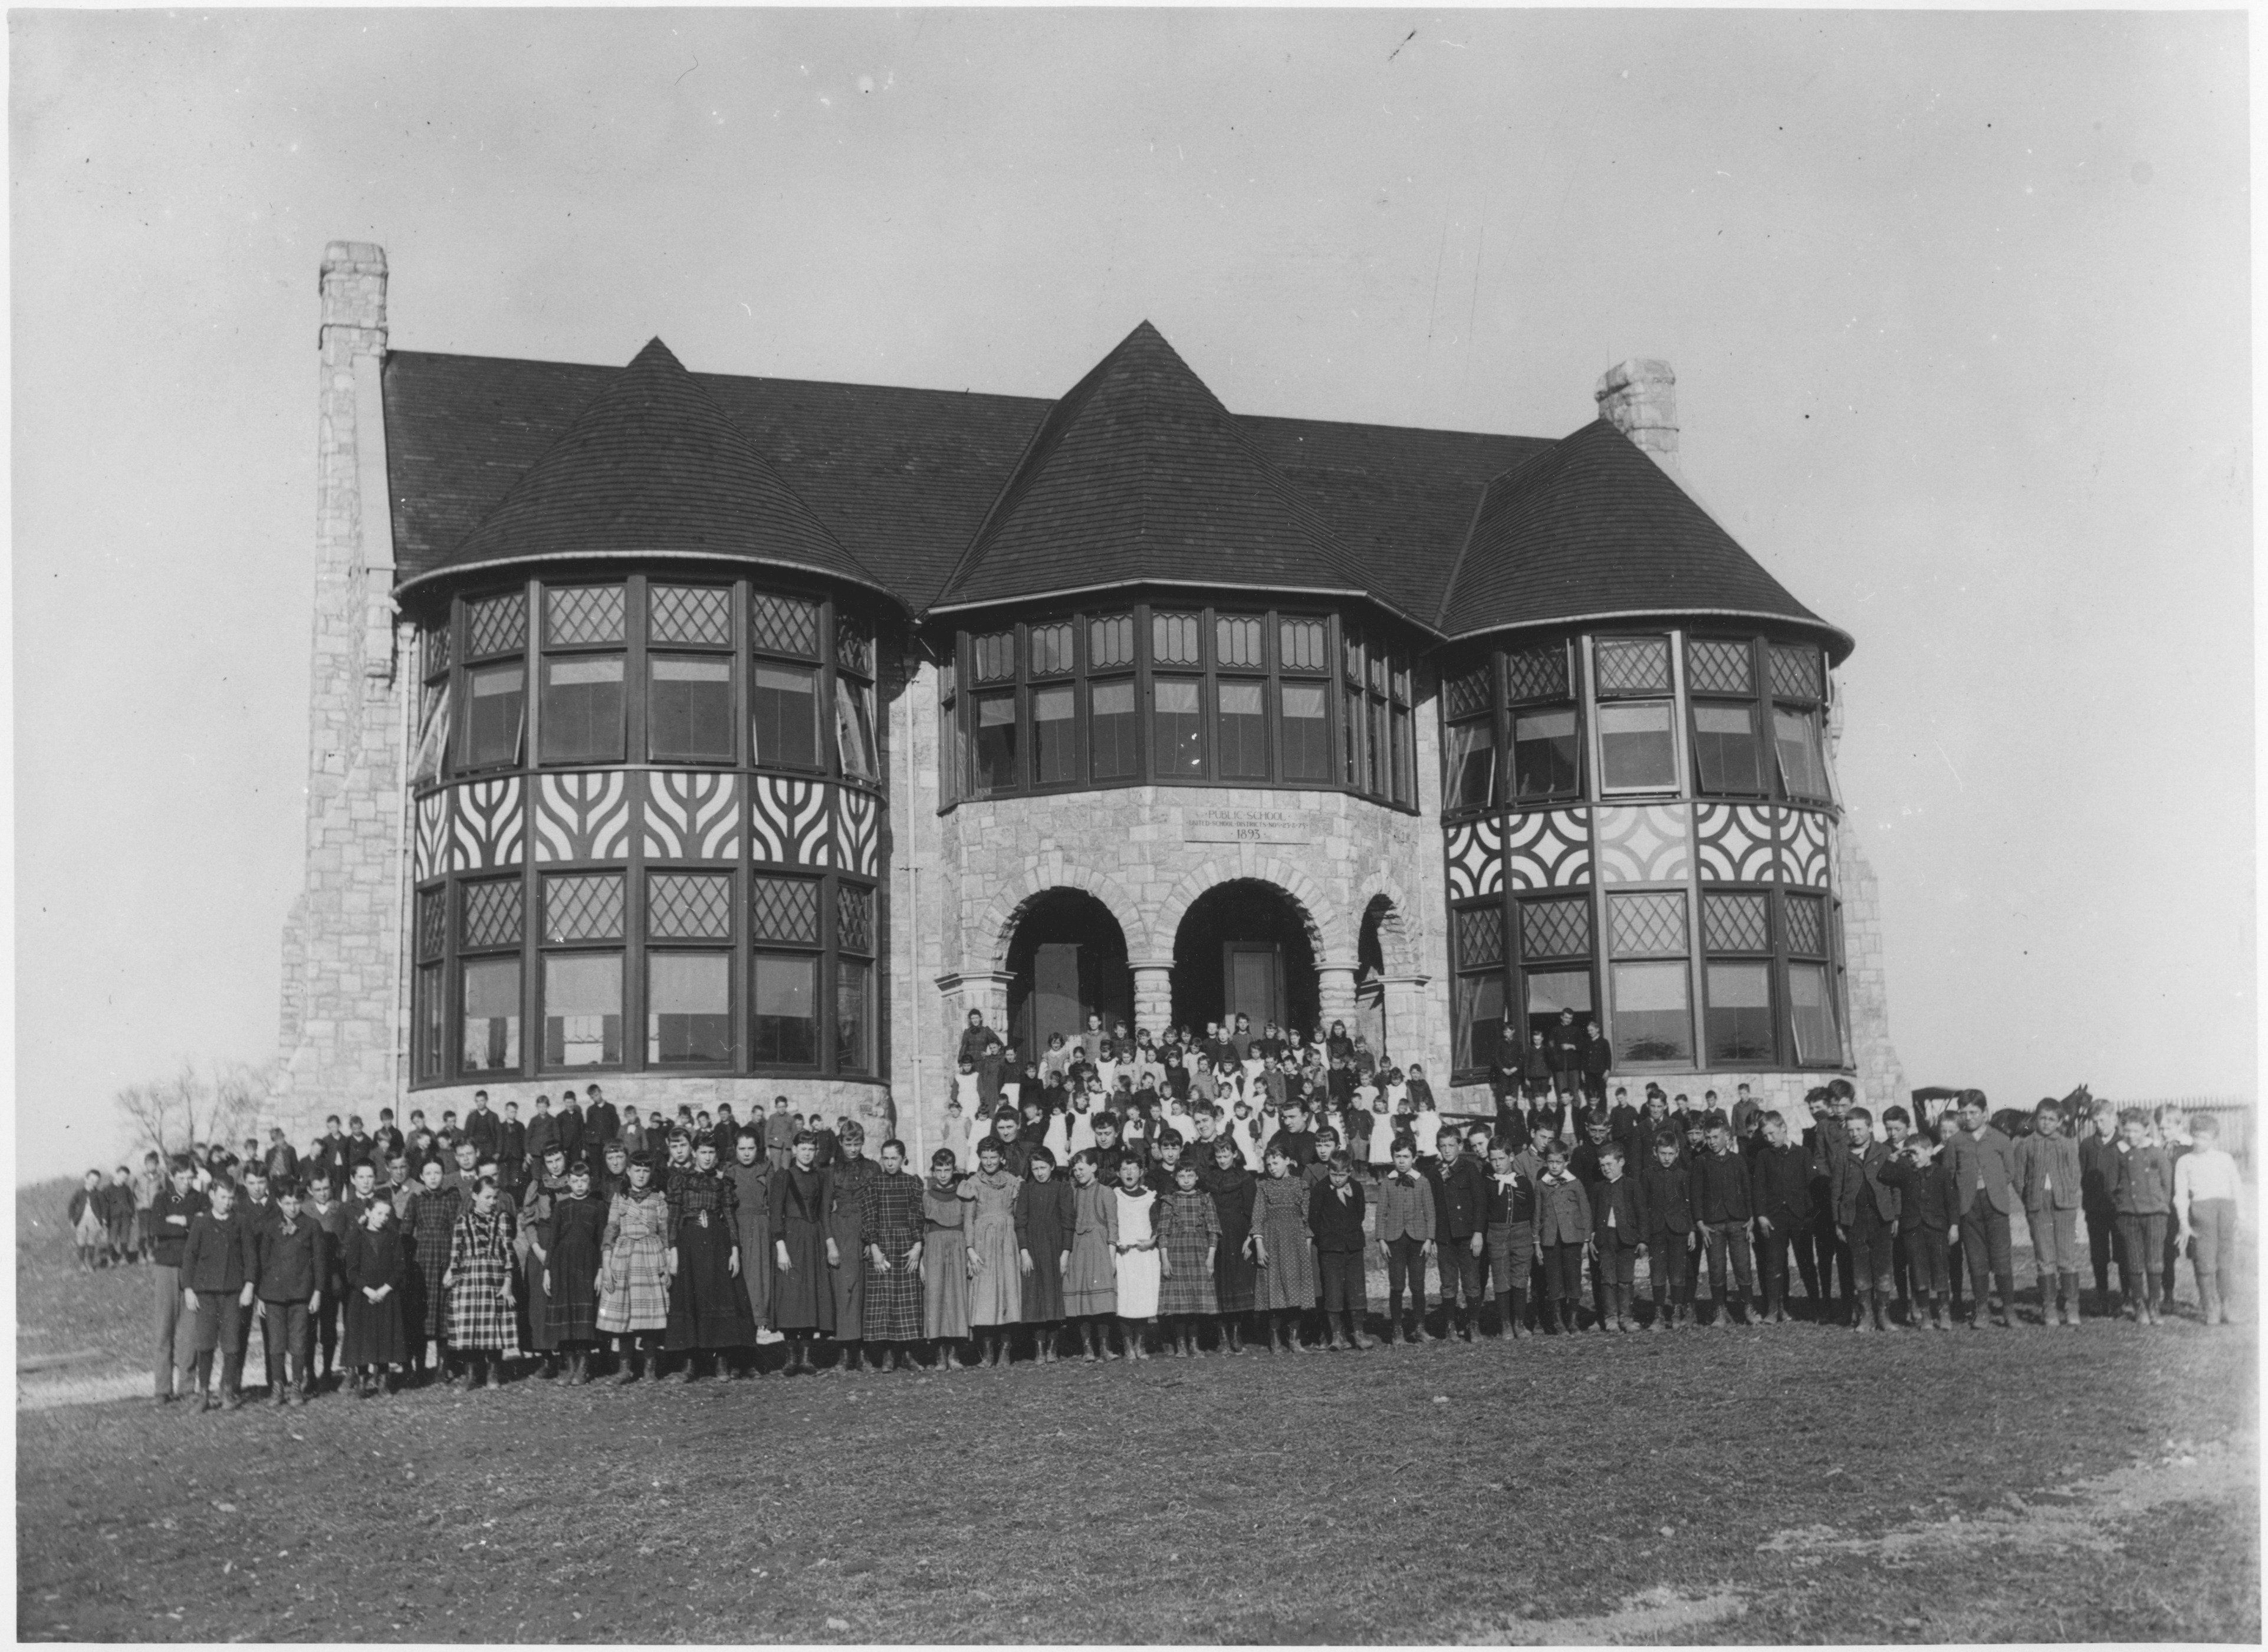 Black and white group photograph of many children posed outside of a large school building